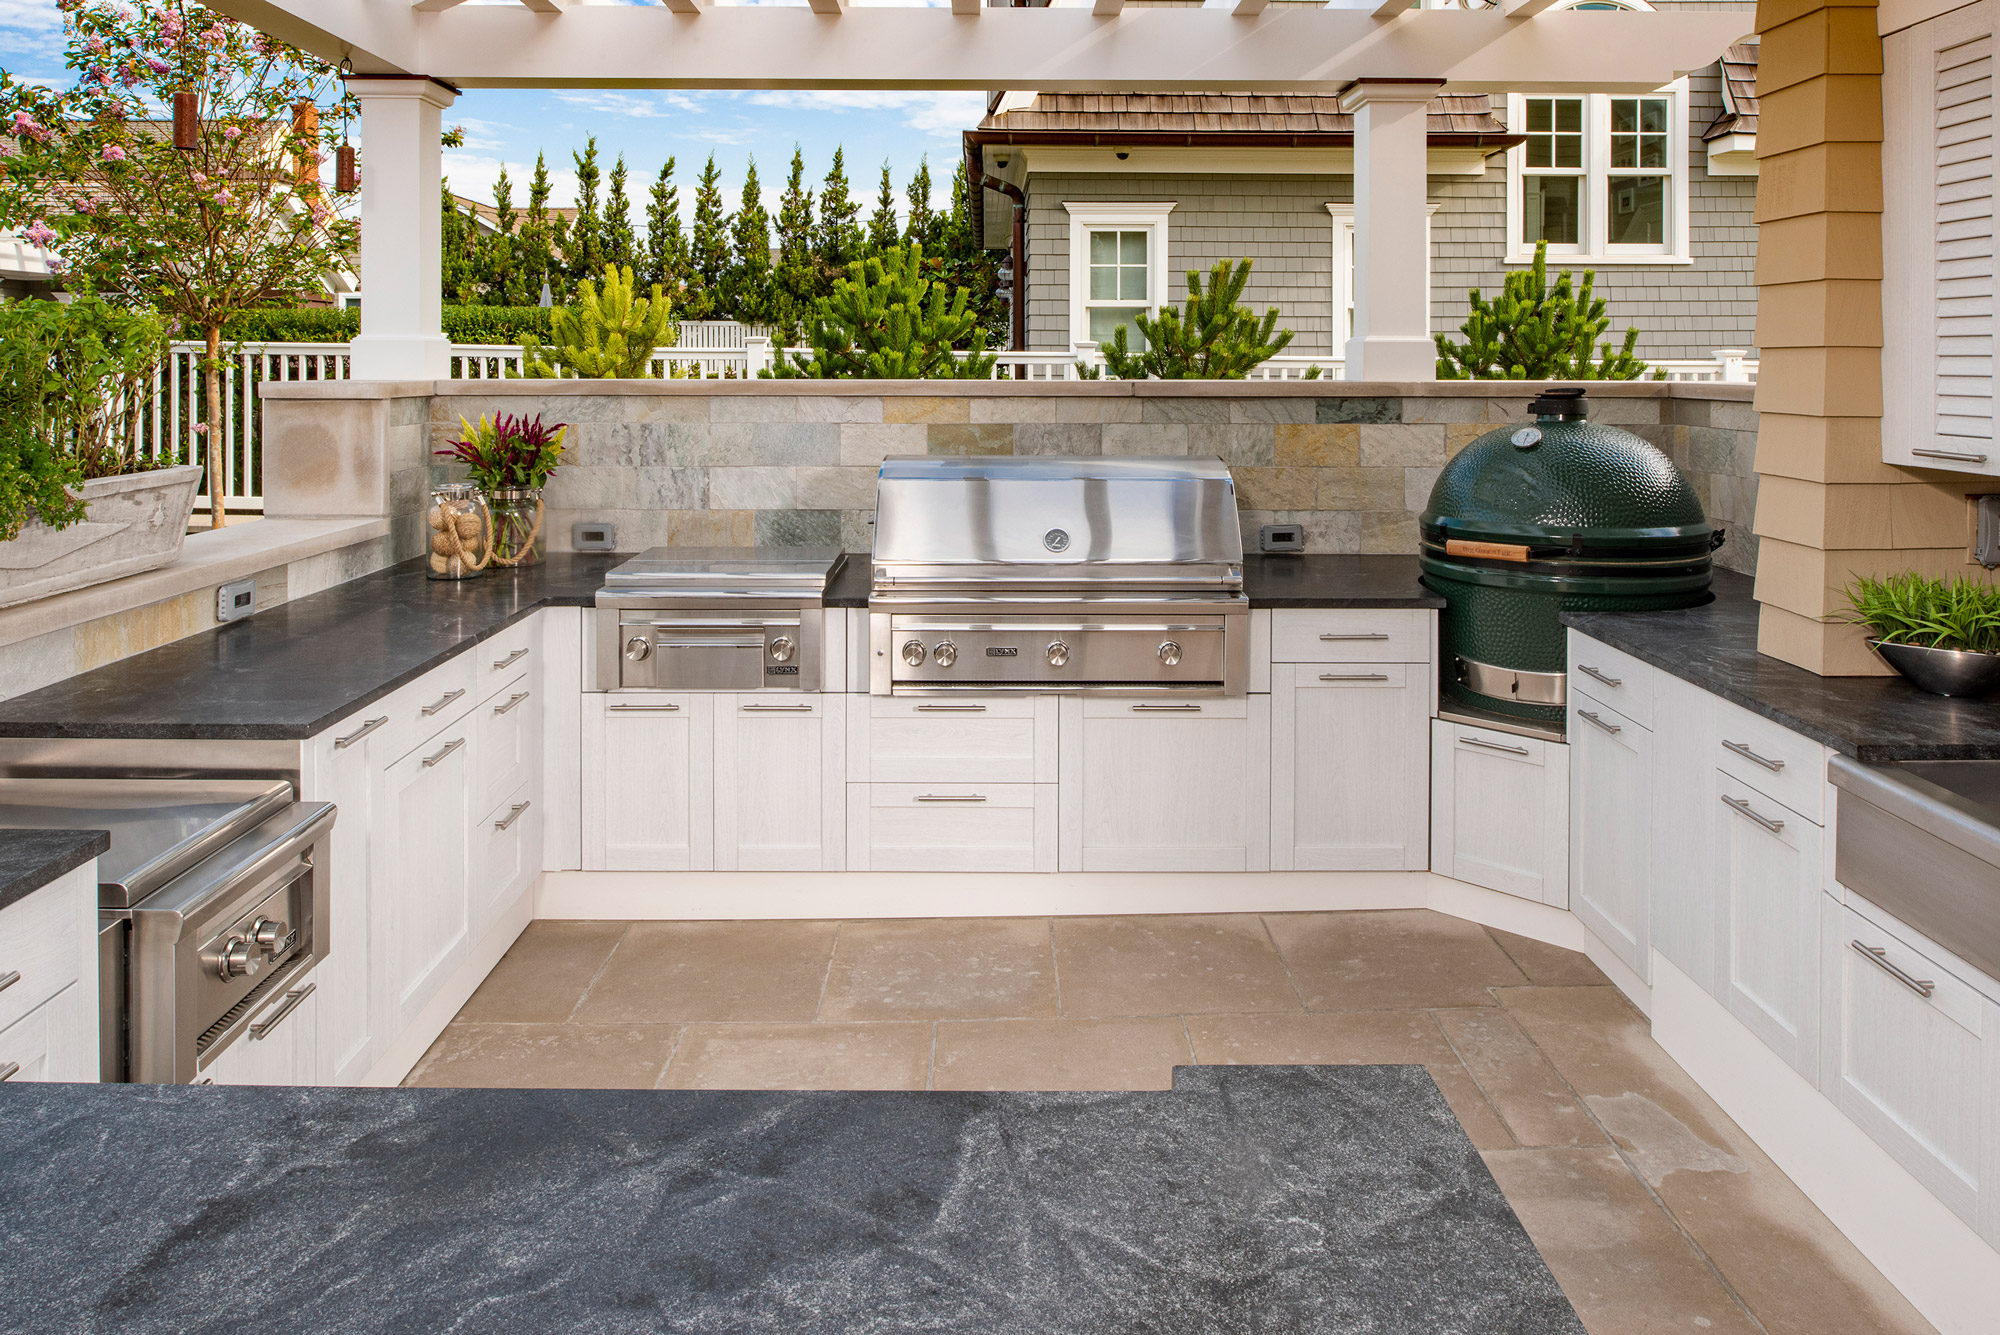 How Can We Make an Outdoor Kitchen More Luxurious And Functional? 